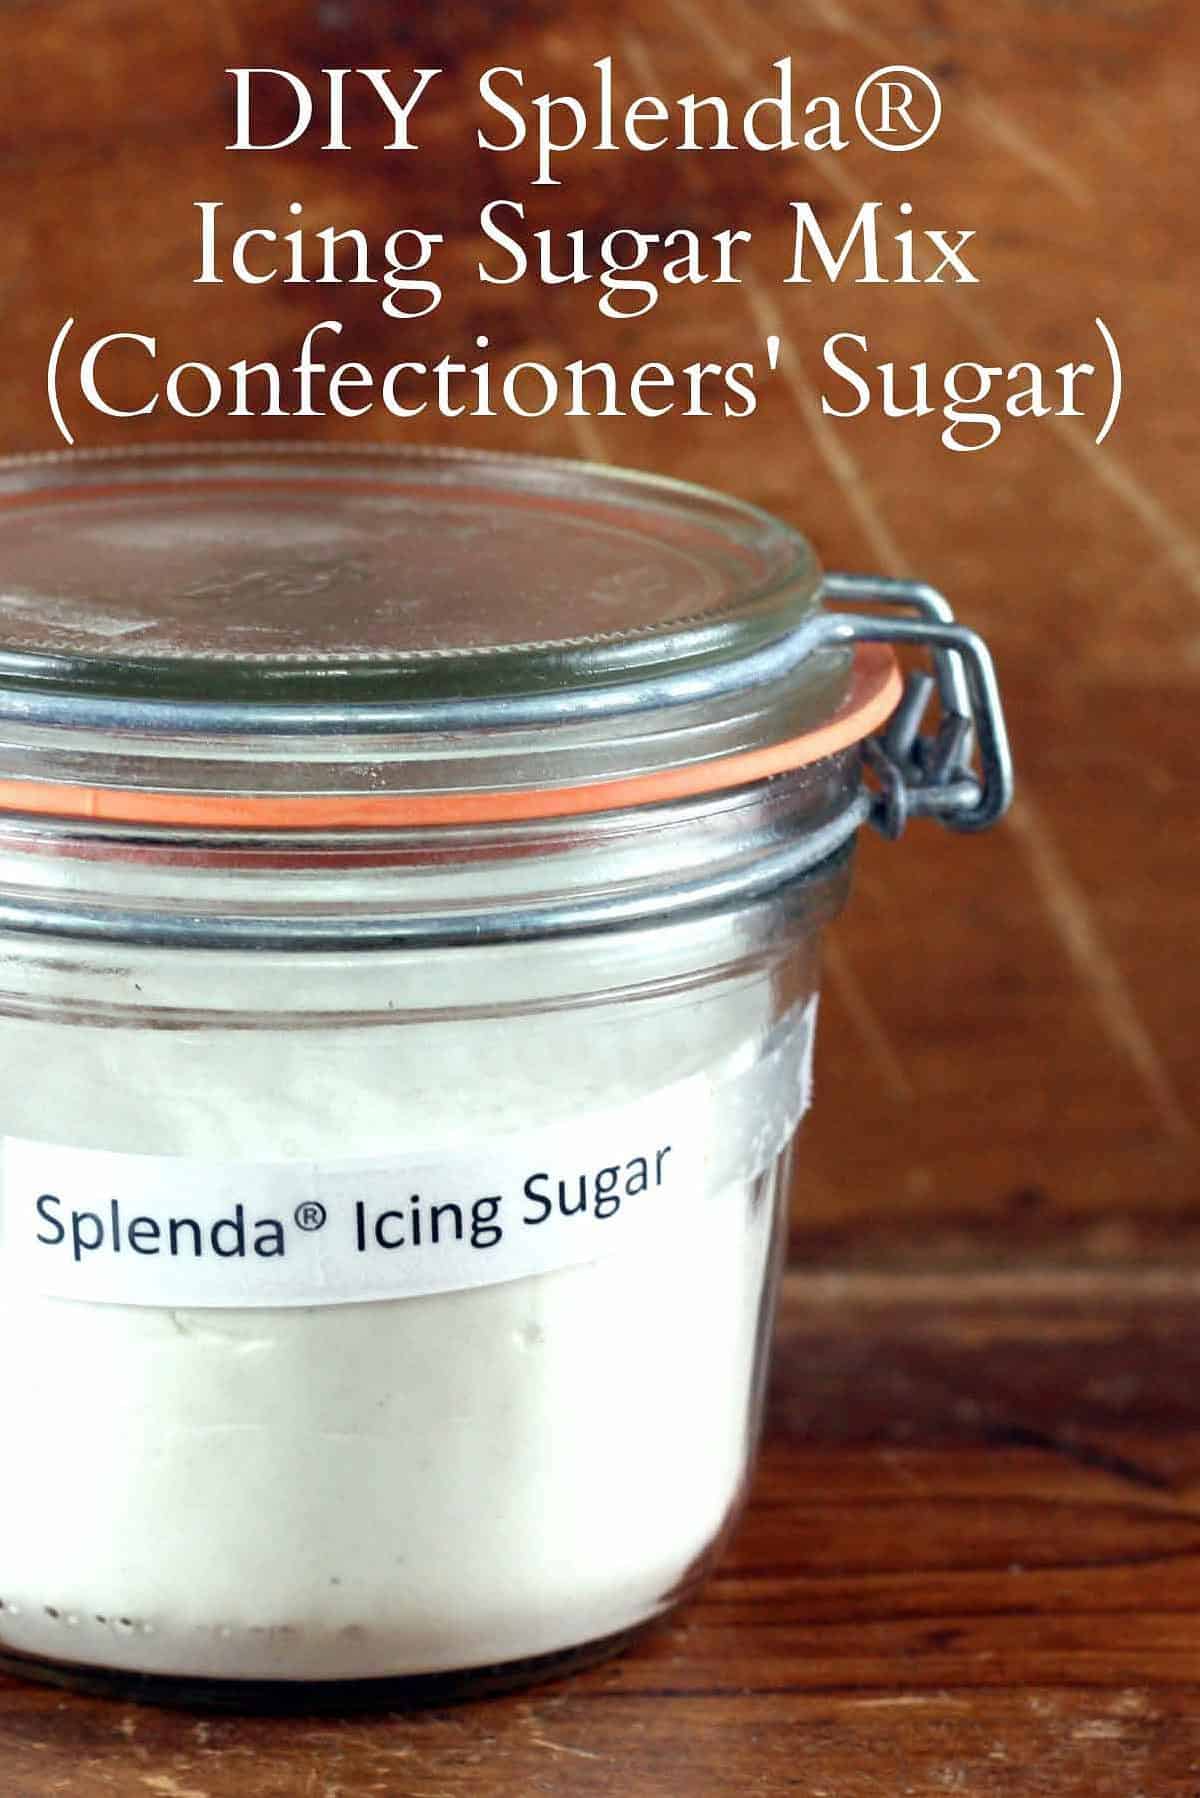  Enhance the taste of your desserts without worrying about the sugar with this Splenda glaze.